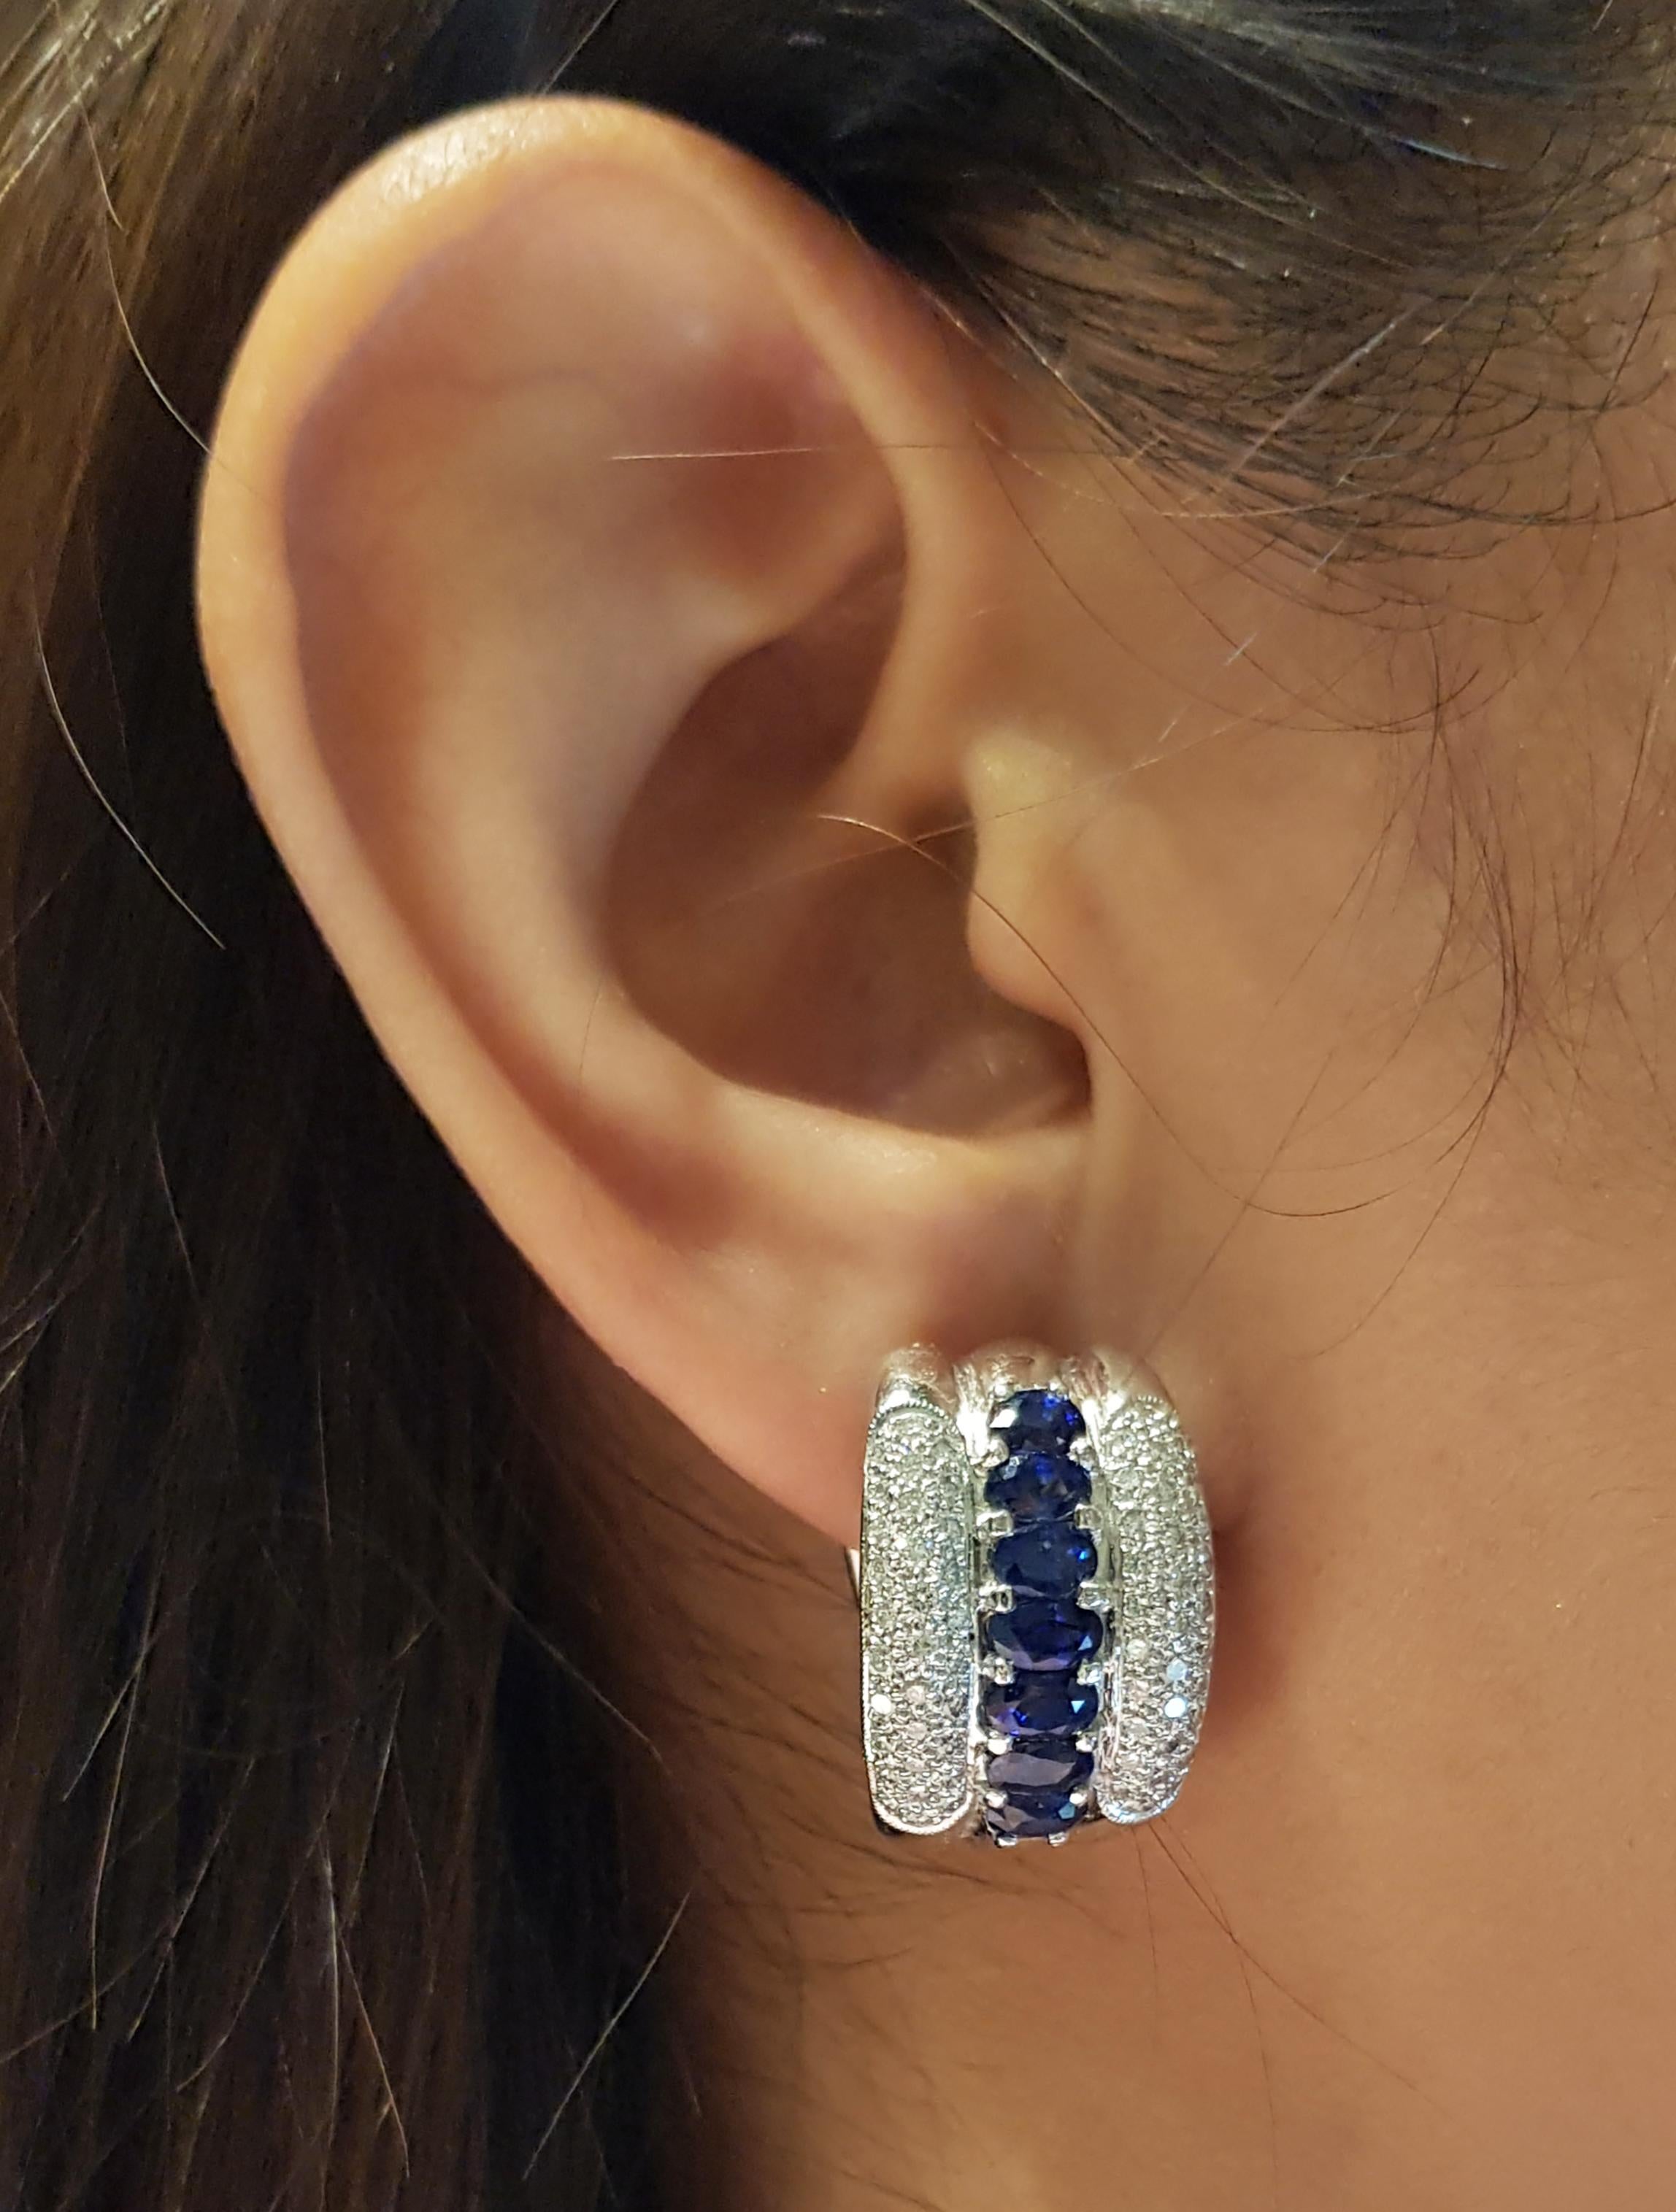 Blue Sapphire 5.35 carats with Diamond 1.33 carats Earrings set in Platinum 900 Settings

Width:  1.4 cm 
Length: 2.3 cm
Total Weight: 32.64 grams

